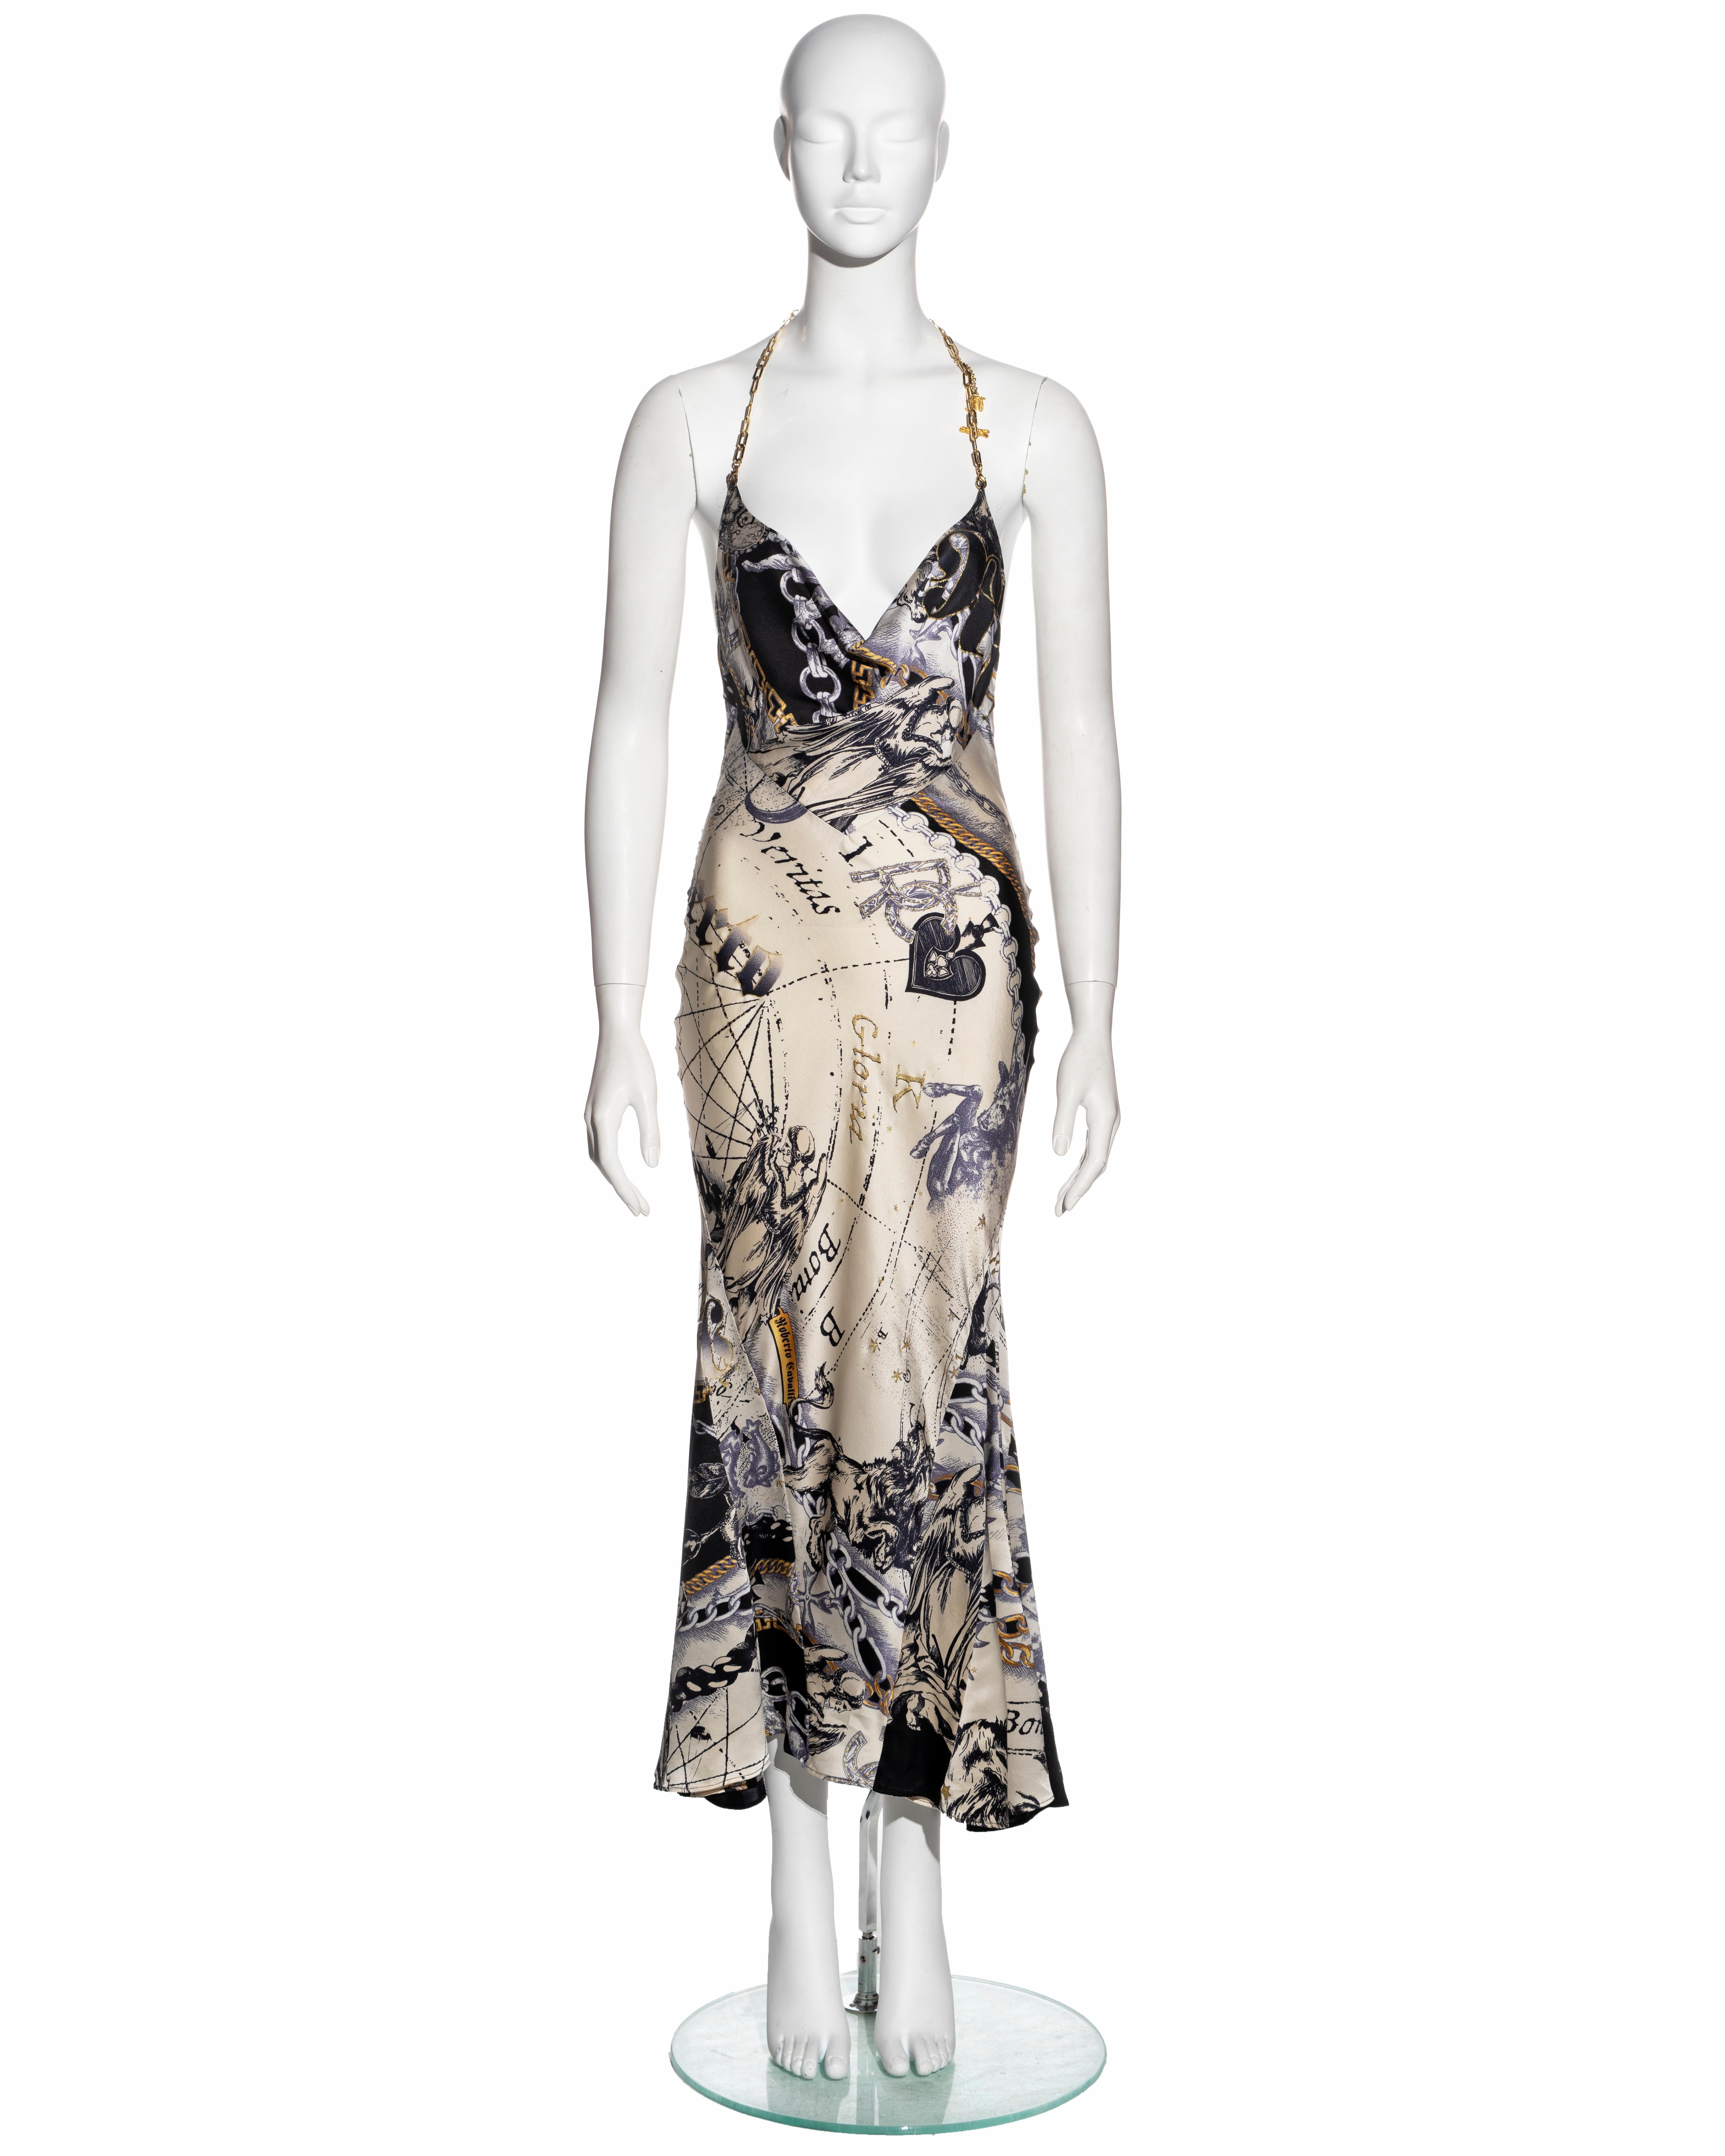 ▪ Roberto Cavalli evening dress  
▪ Sold by One of a Kind Archive 
▪ Constructed from bias-cut cream silk with a zodiac print featuring imagery of chains and roses
▪ Gold-tone metal chain halter-neck with two charms 
▪ Cowl neck 
▪ Size Small
▪